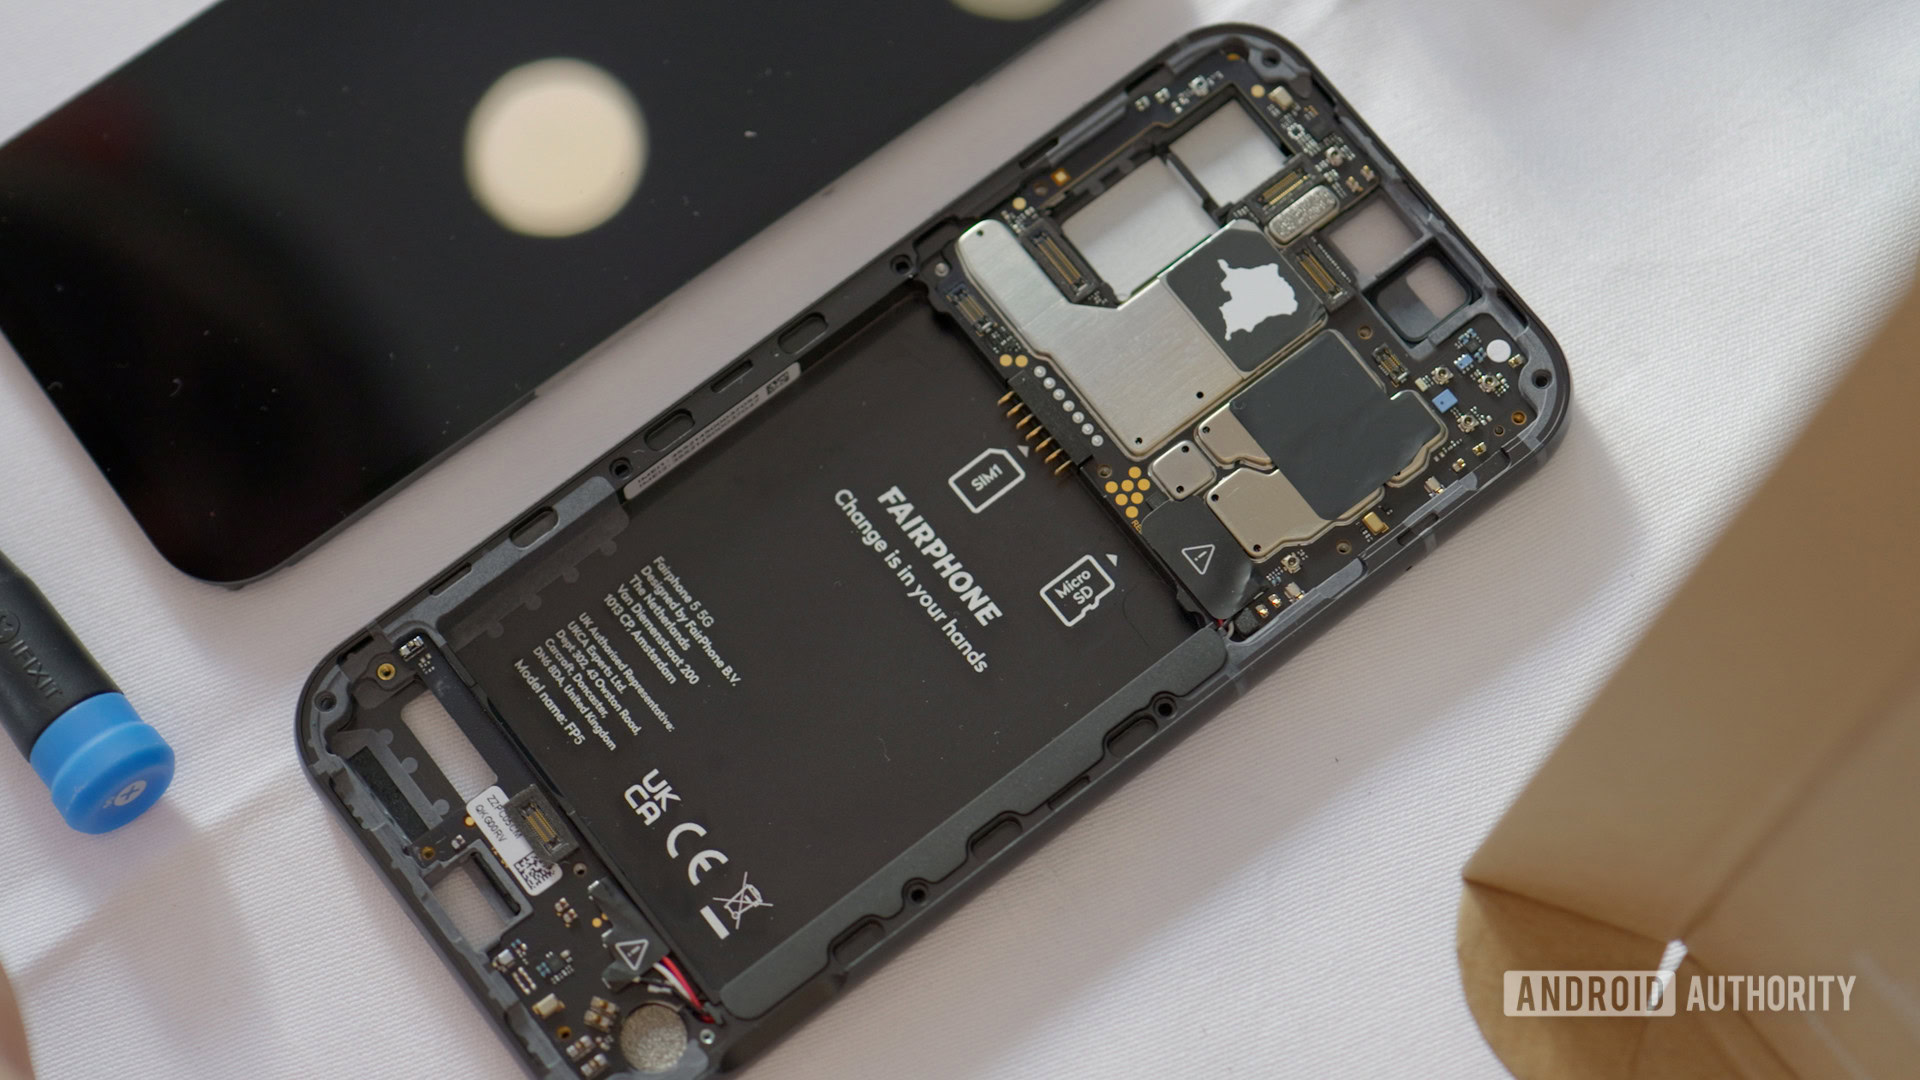 Fairphone 5 sourced, Modular, hands-on: ethically update long promise